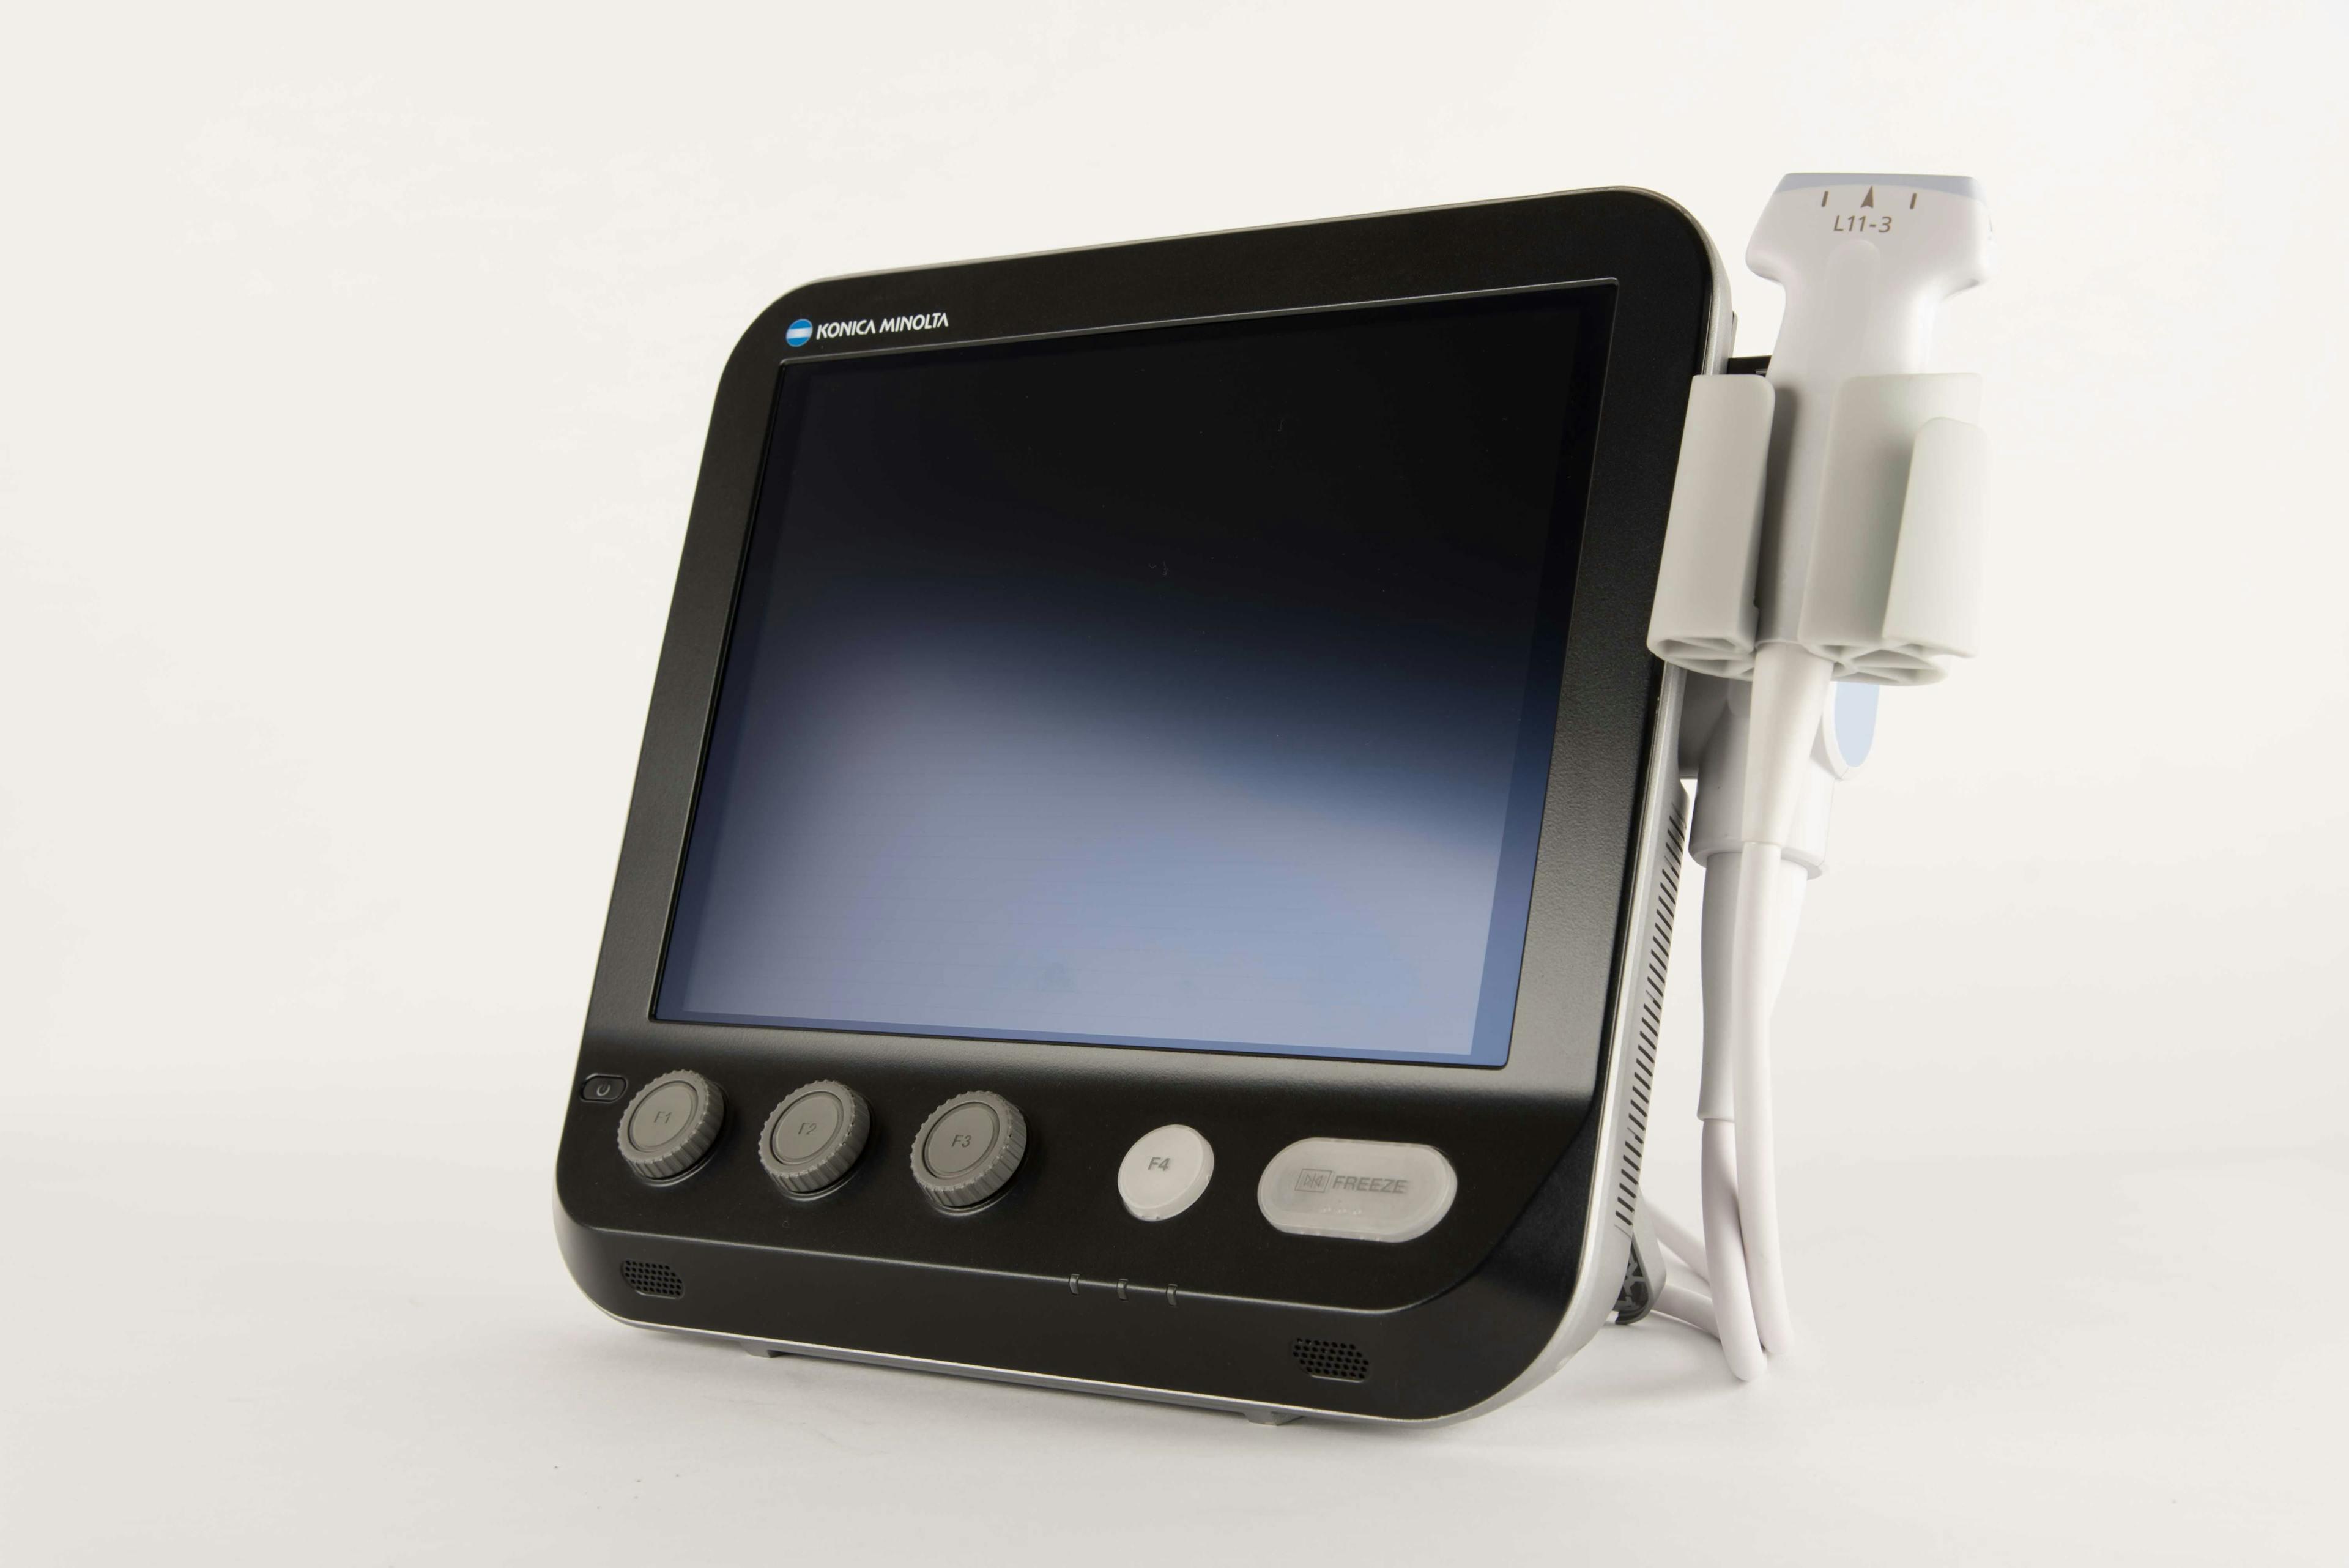 Konica Minolta to Debut New Point-of-Care Ultrasound Device at RSNA Conference